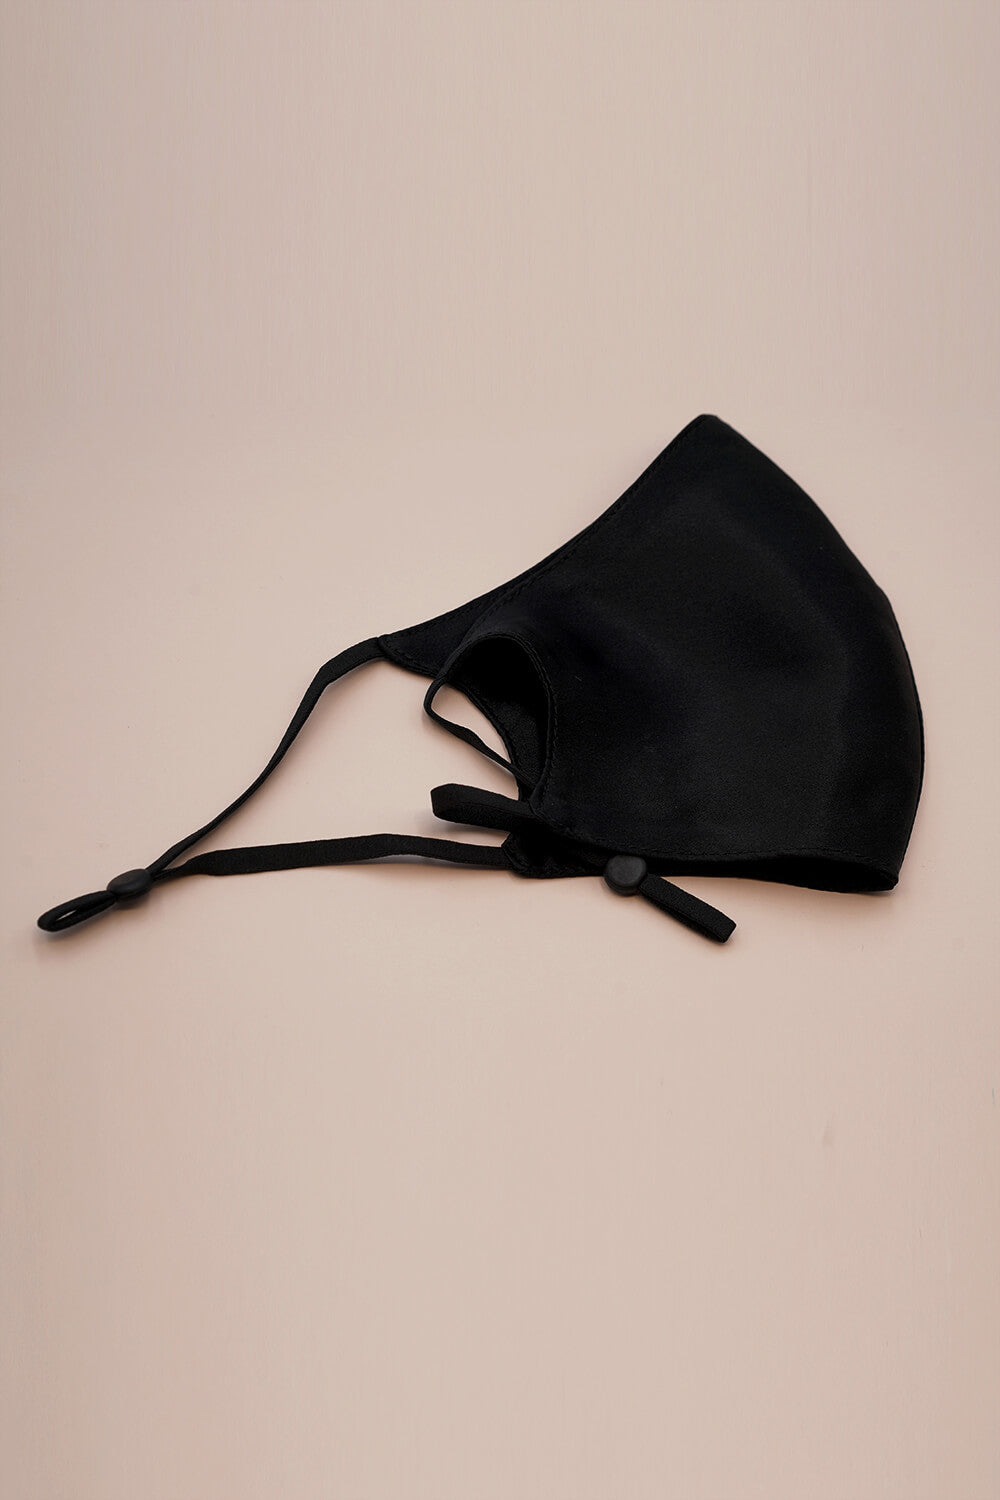 STELLAR Silk Face Cover - Black (No filter pocket. No nose wire) - BASK™